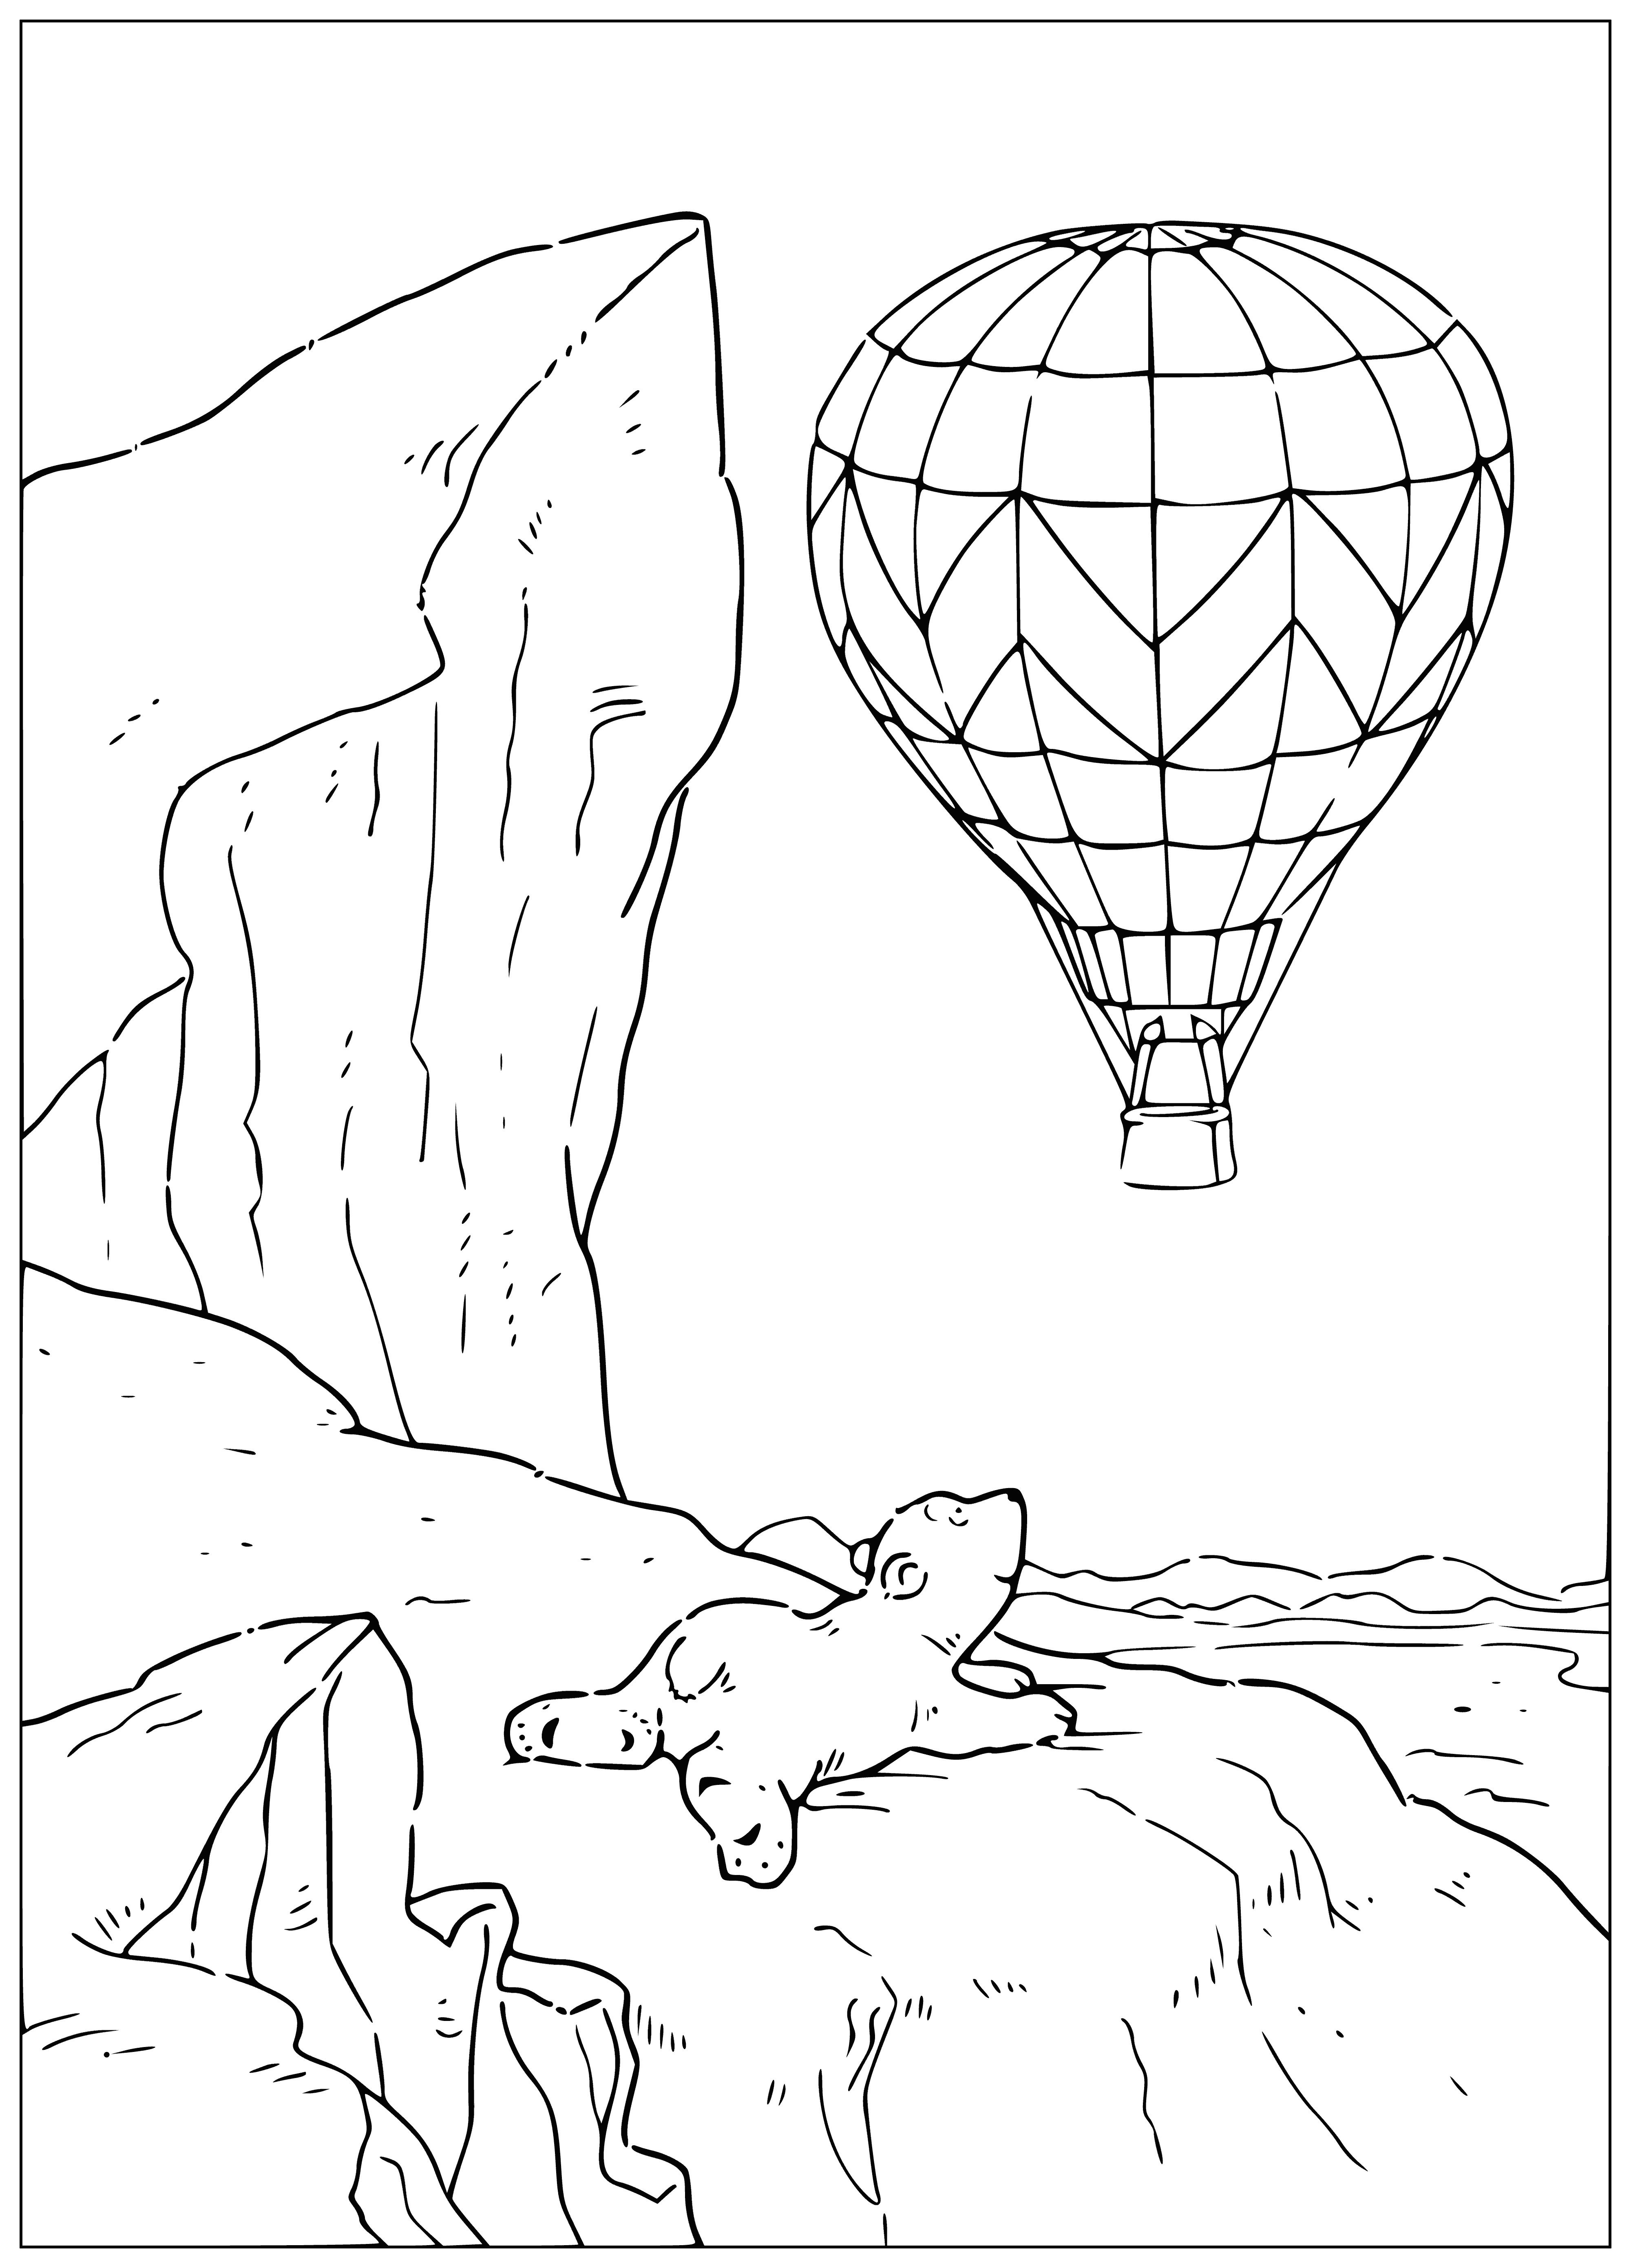 coloring page: A little polar bear holds a red balloon, happy on a piece of ice, in a coloring page.